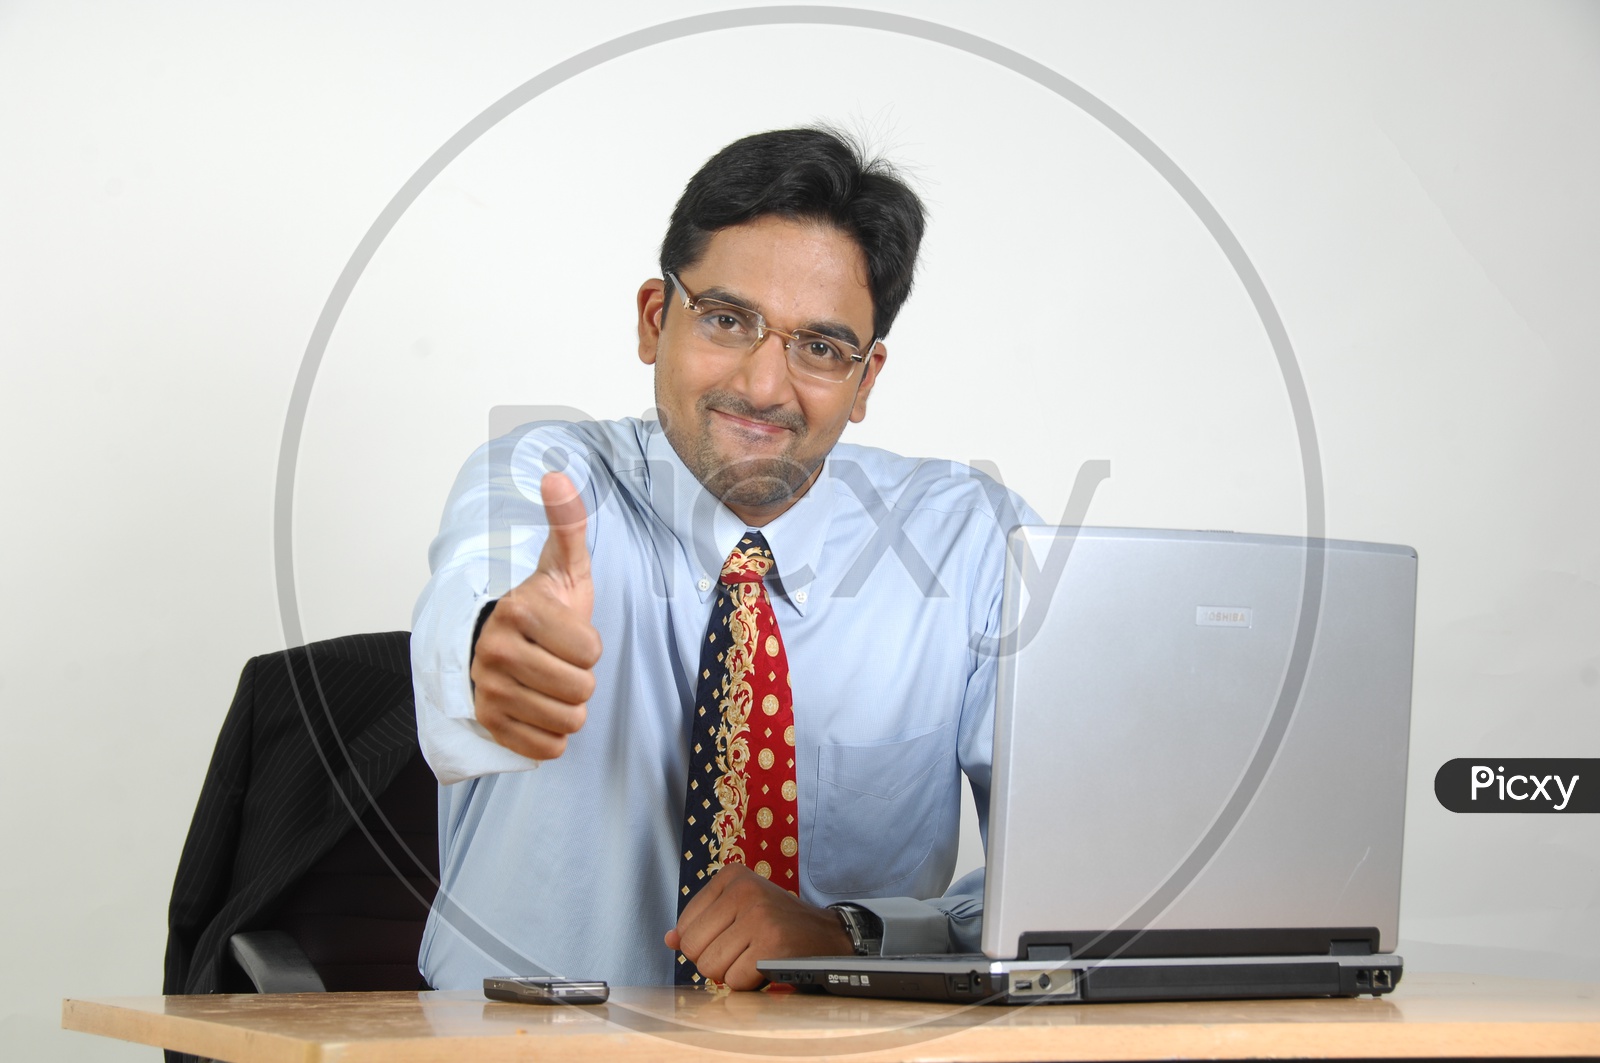 Indian Office Employee With Old Laptop And Thumbsup Gesture At Office Desk